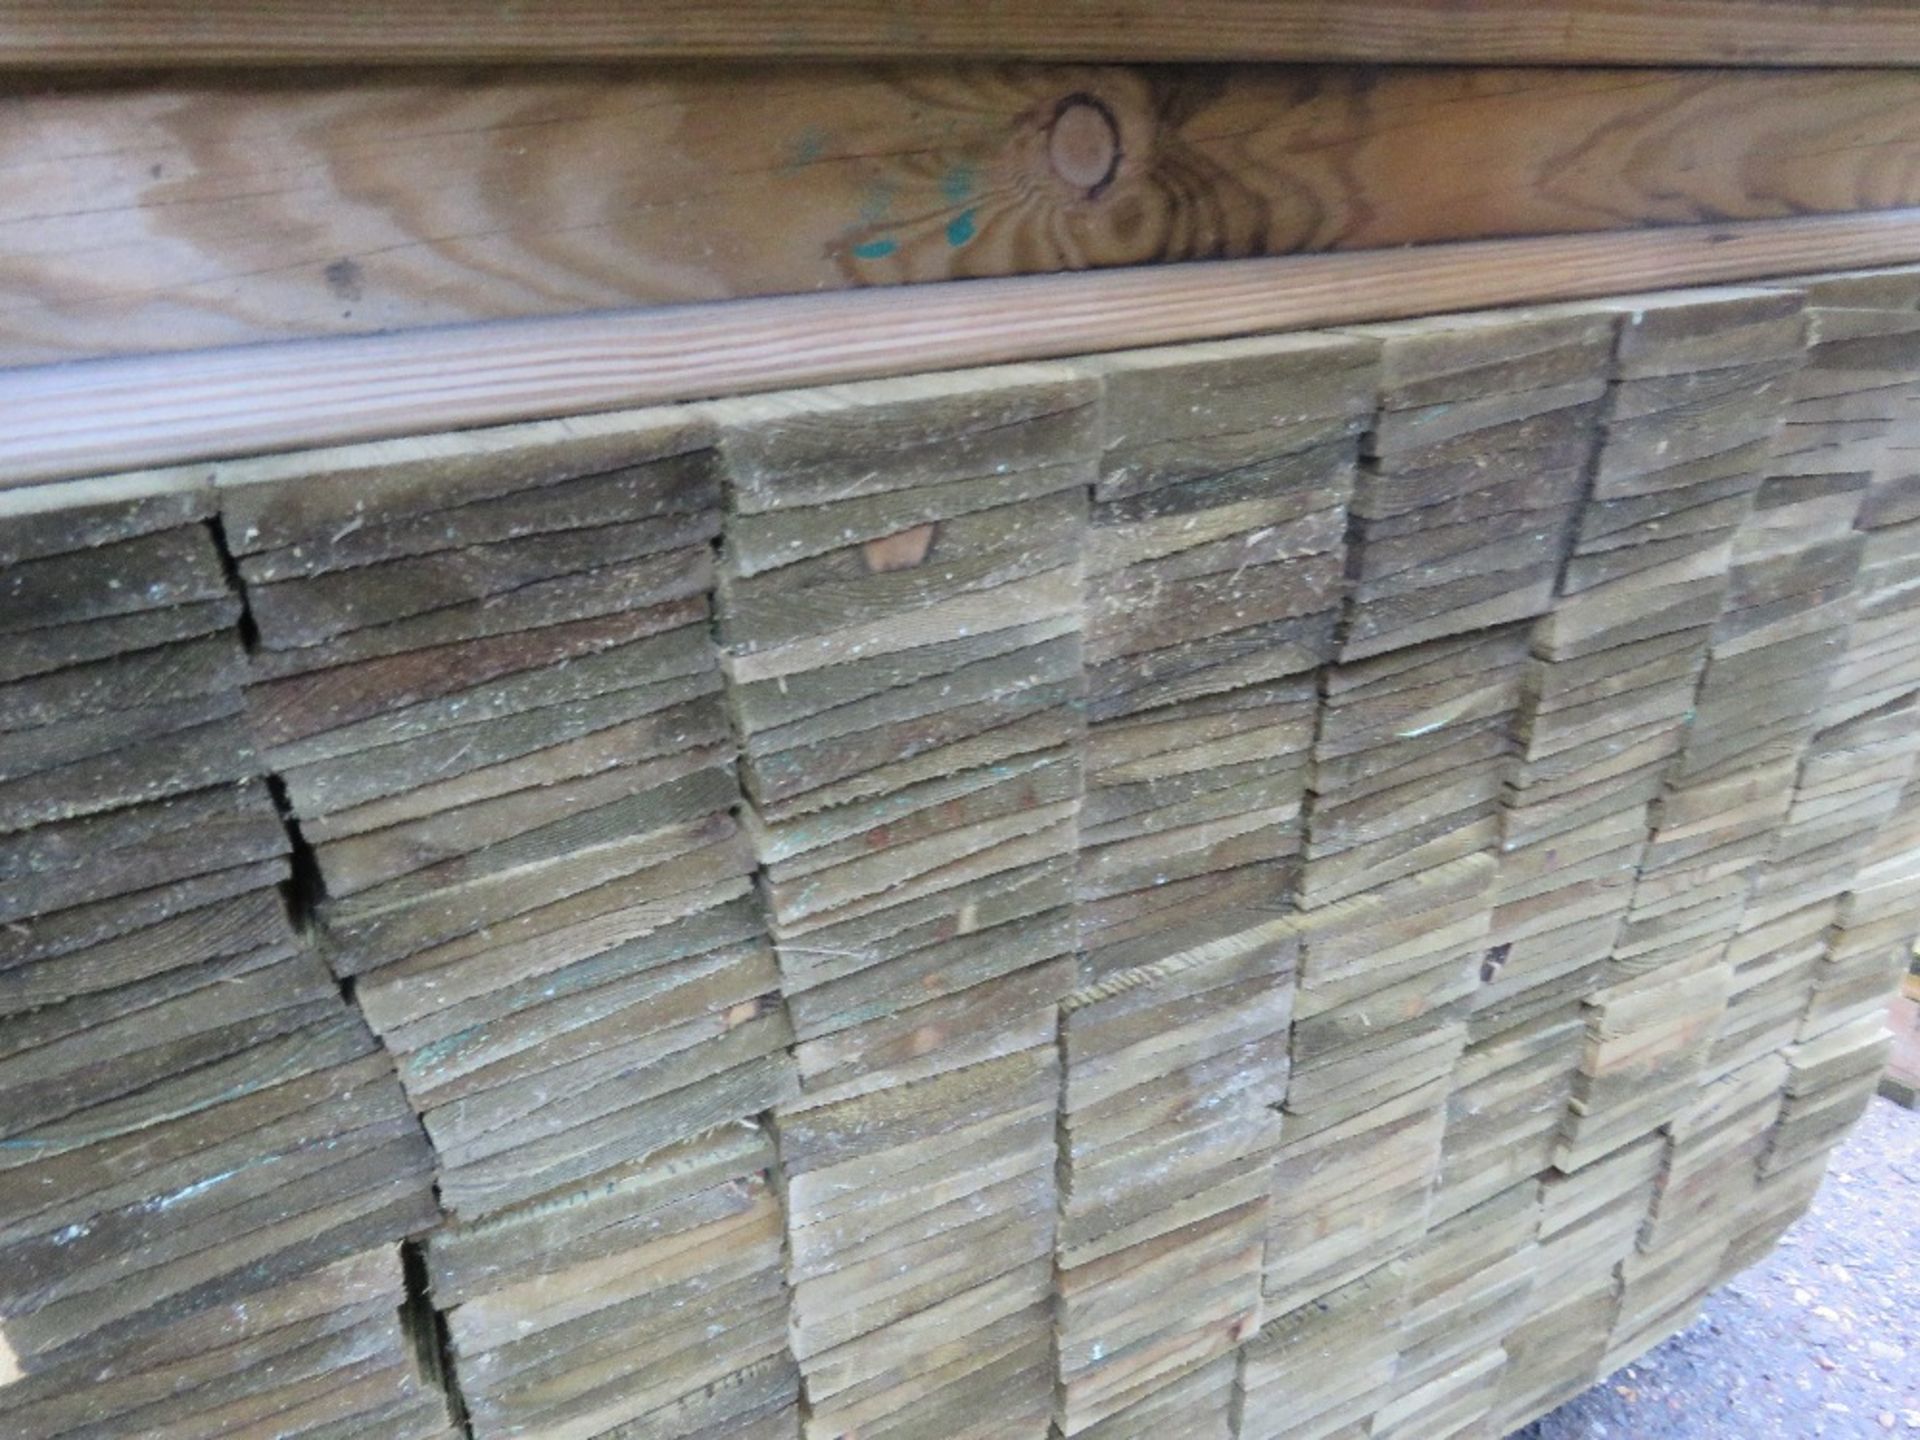 LARGE BUNDLE OF PRESSURE TREATED FEATHER EDGE TIMBER CLADDING: 1.5M LENGTH X 10CM WIDTH APPROX. - Image 2 of 3